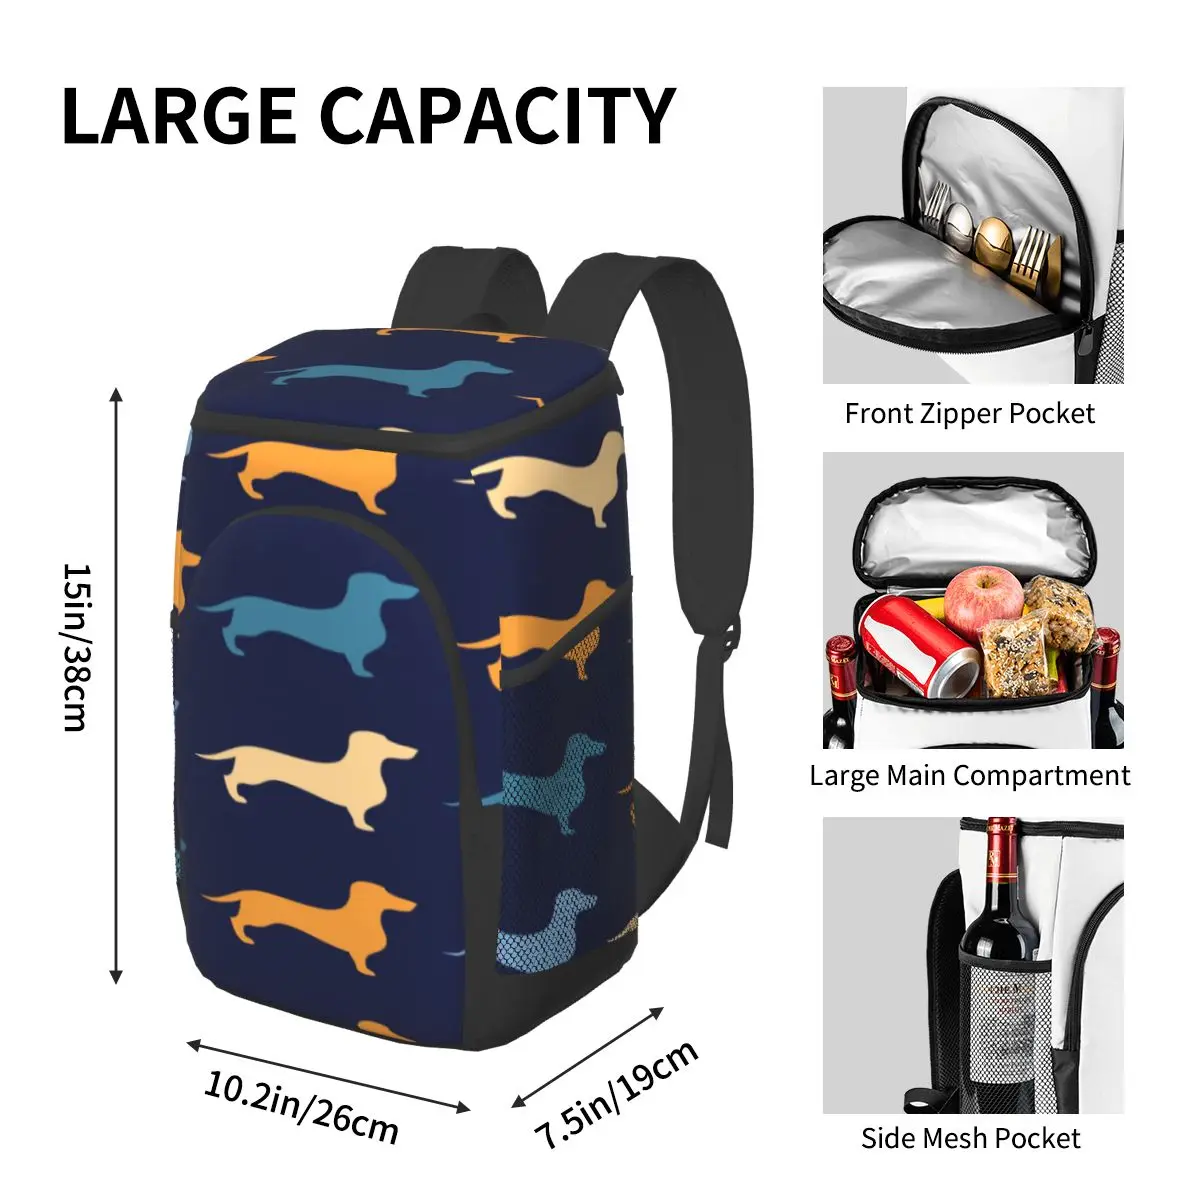 picnic cooler backpack colorful dachshunds dog lover pet waterproof thermo bag refrigerator fresh keeping thermal insulated bag free global shipping